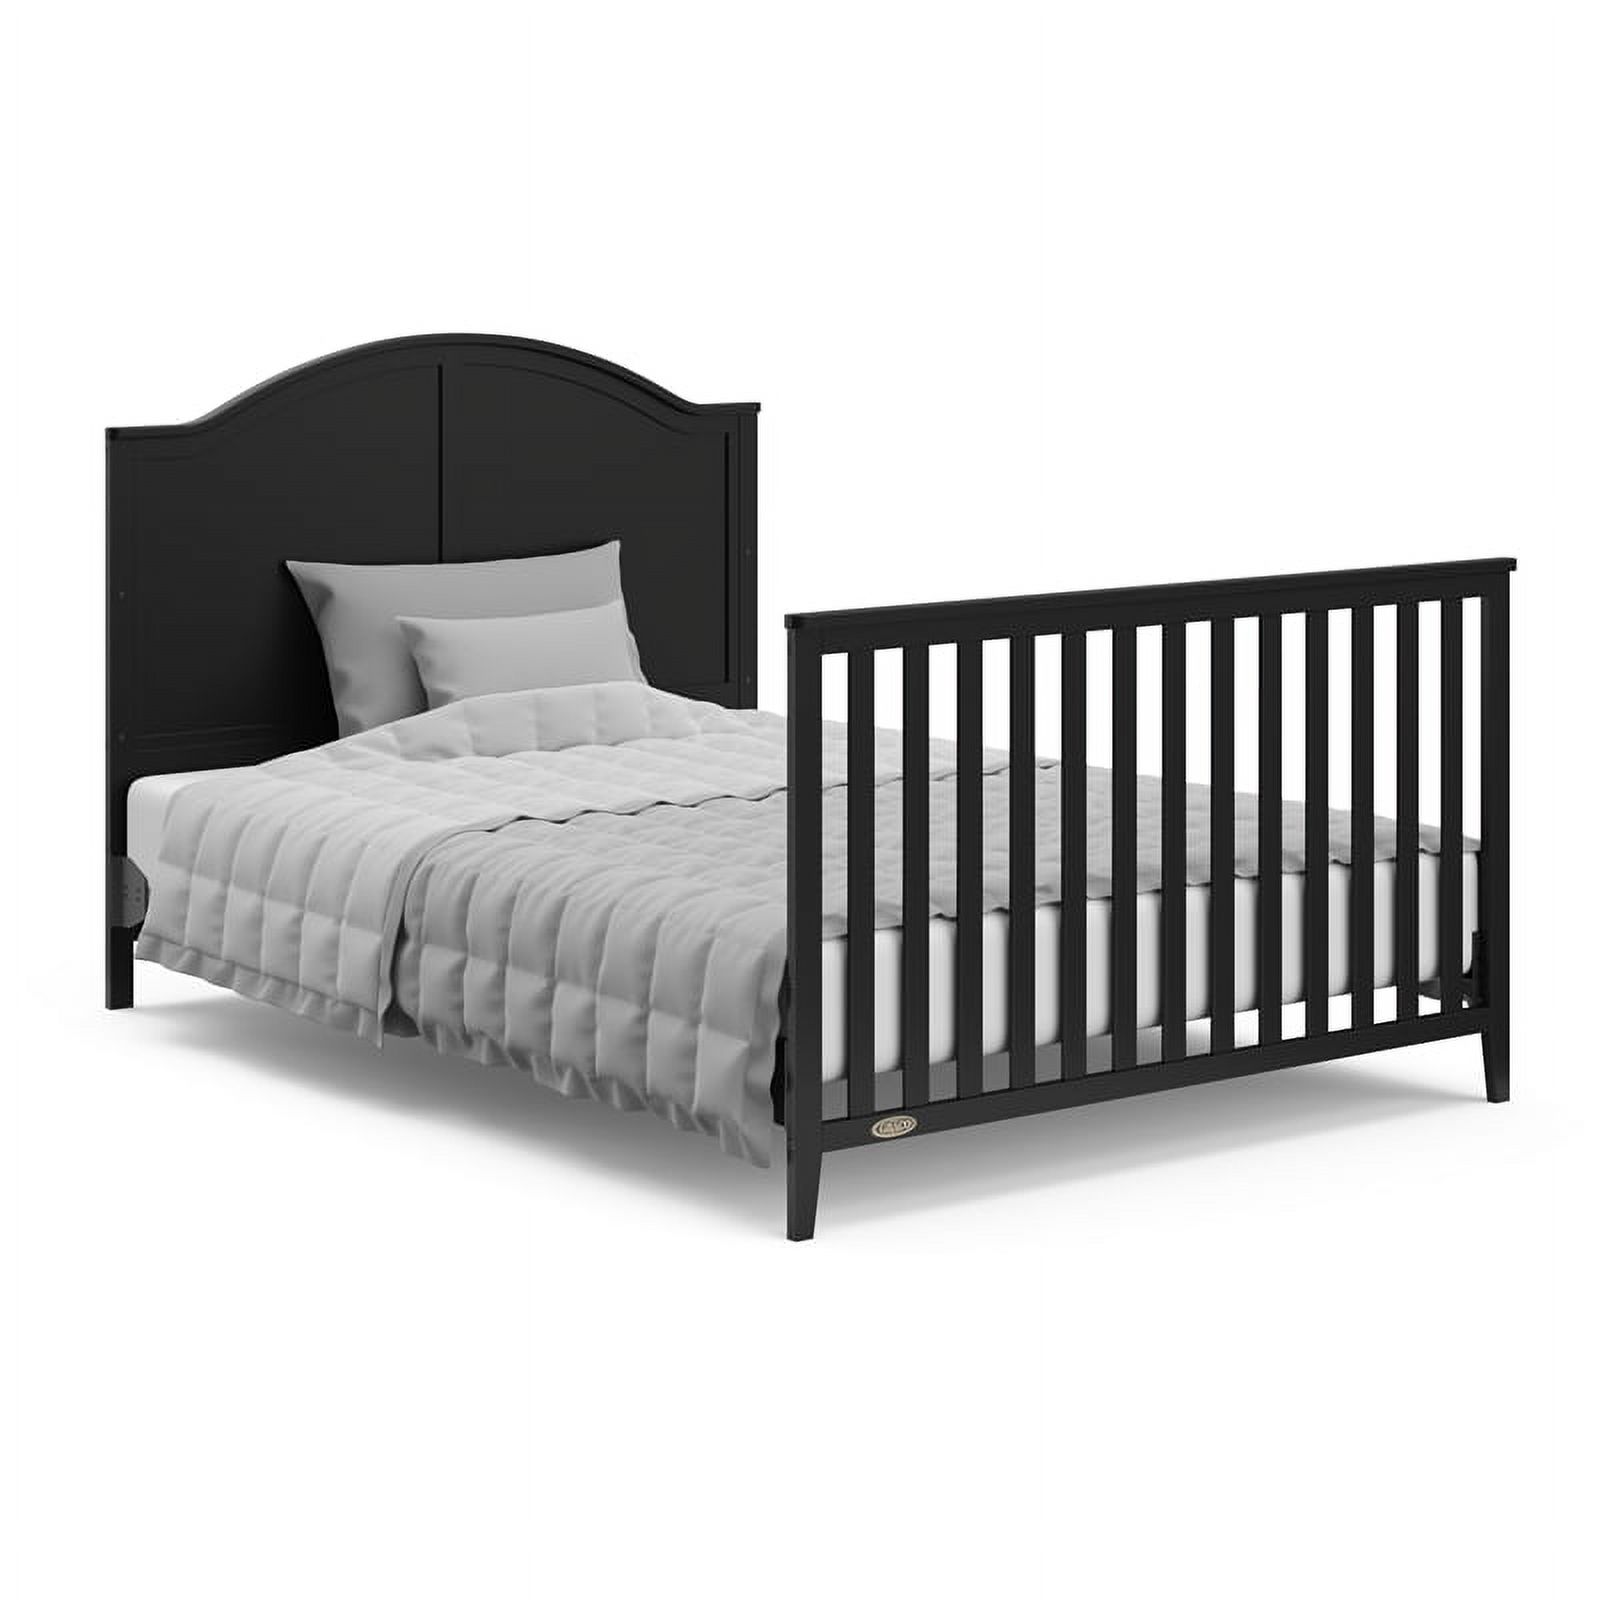 Graco Wilfred 5-in-1 Convertible Baby Crib, Black - image 3 of 4